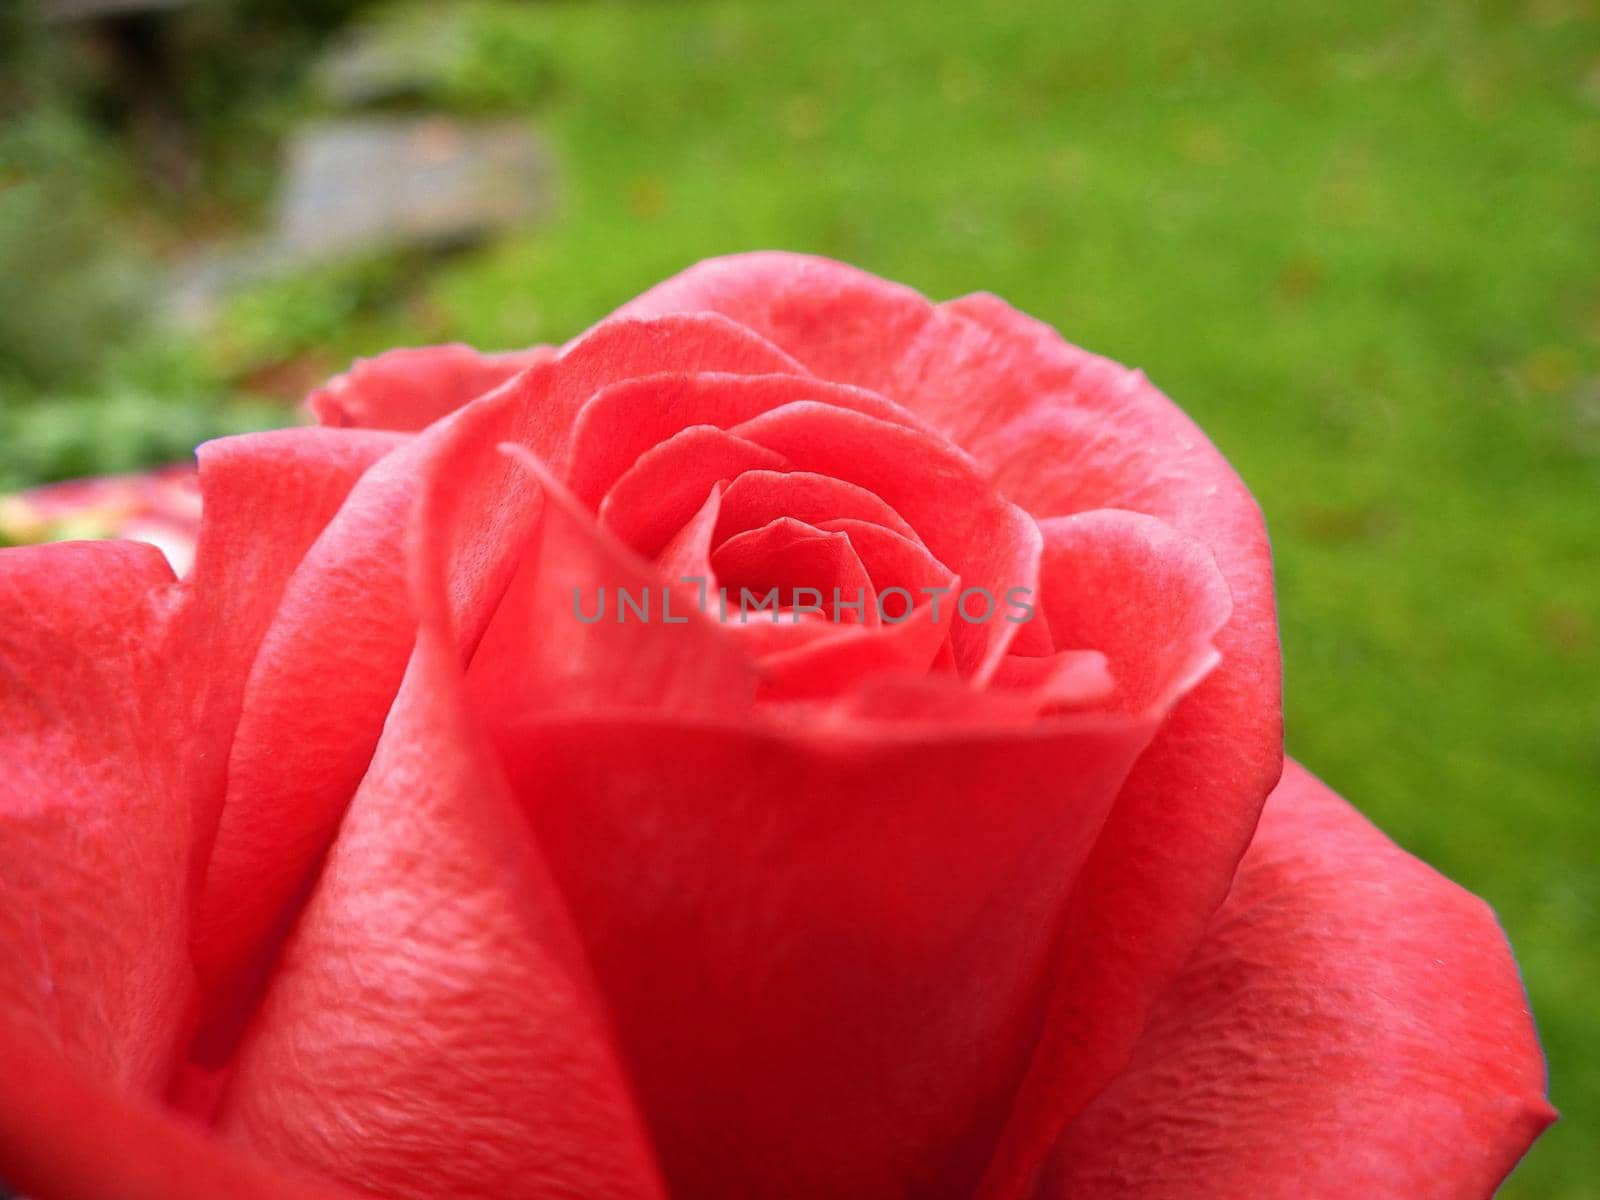 Close-up of a scented red rose with delicate petals, symbol of spring, grown in a garden with green grass